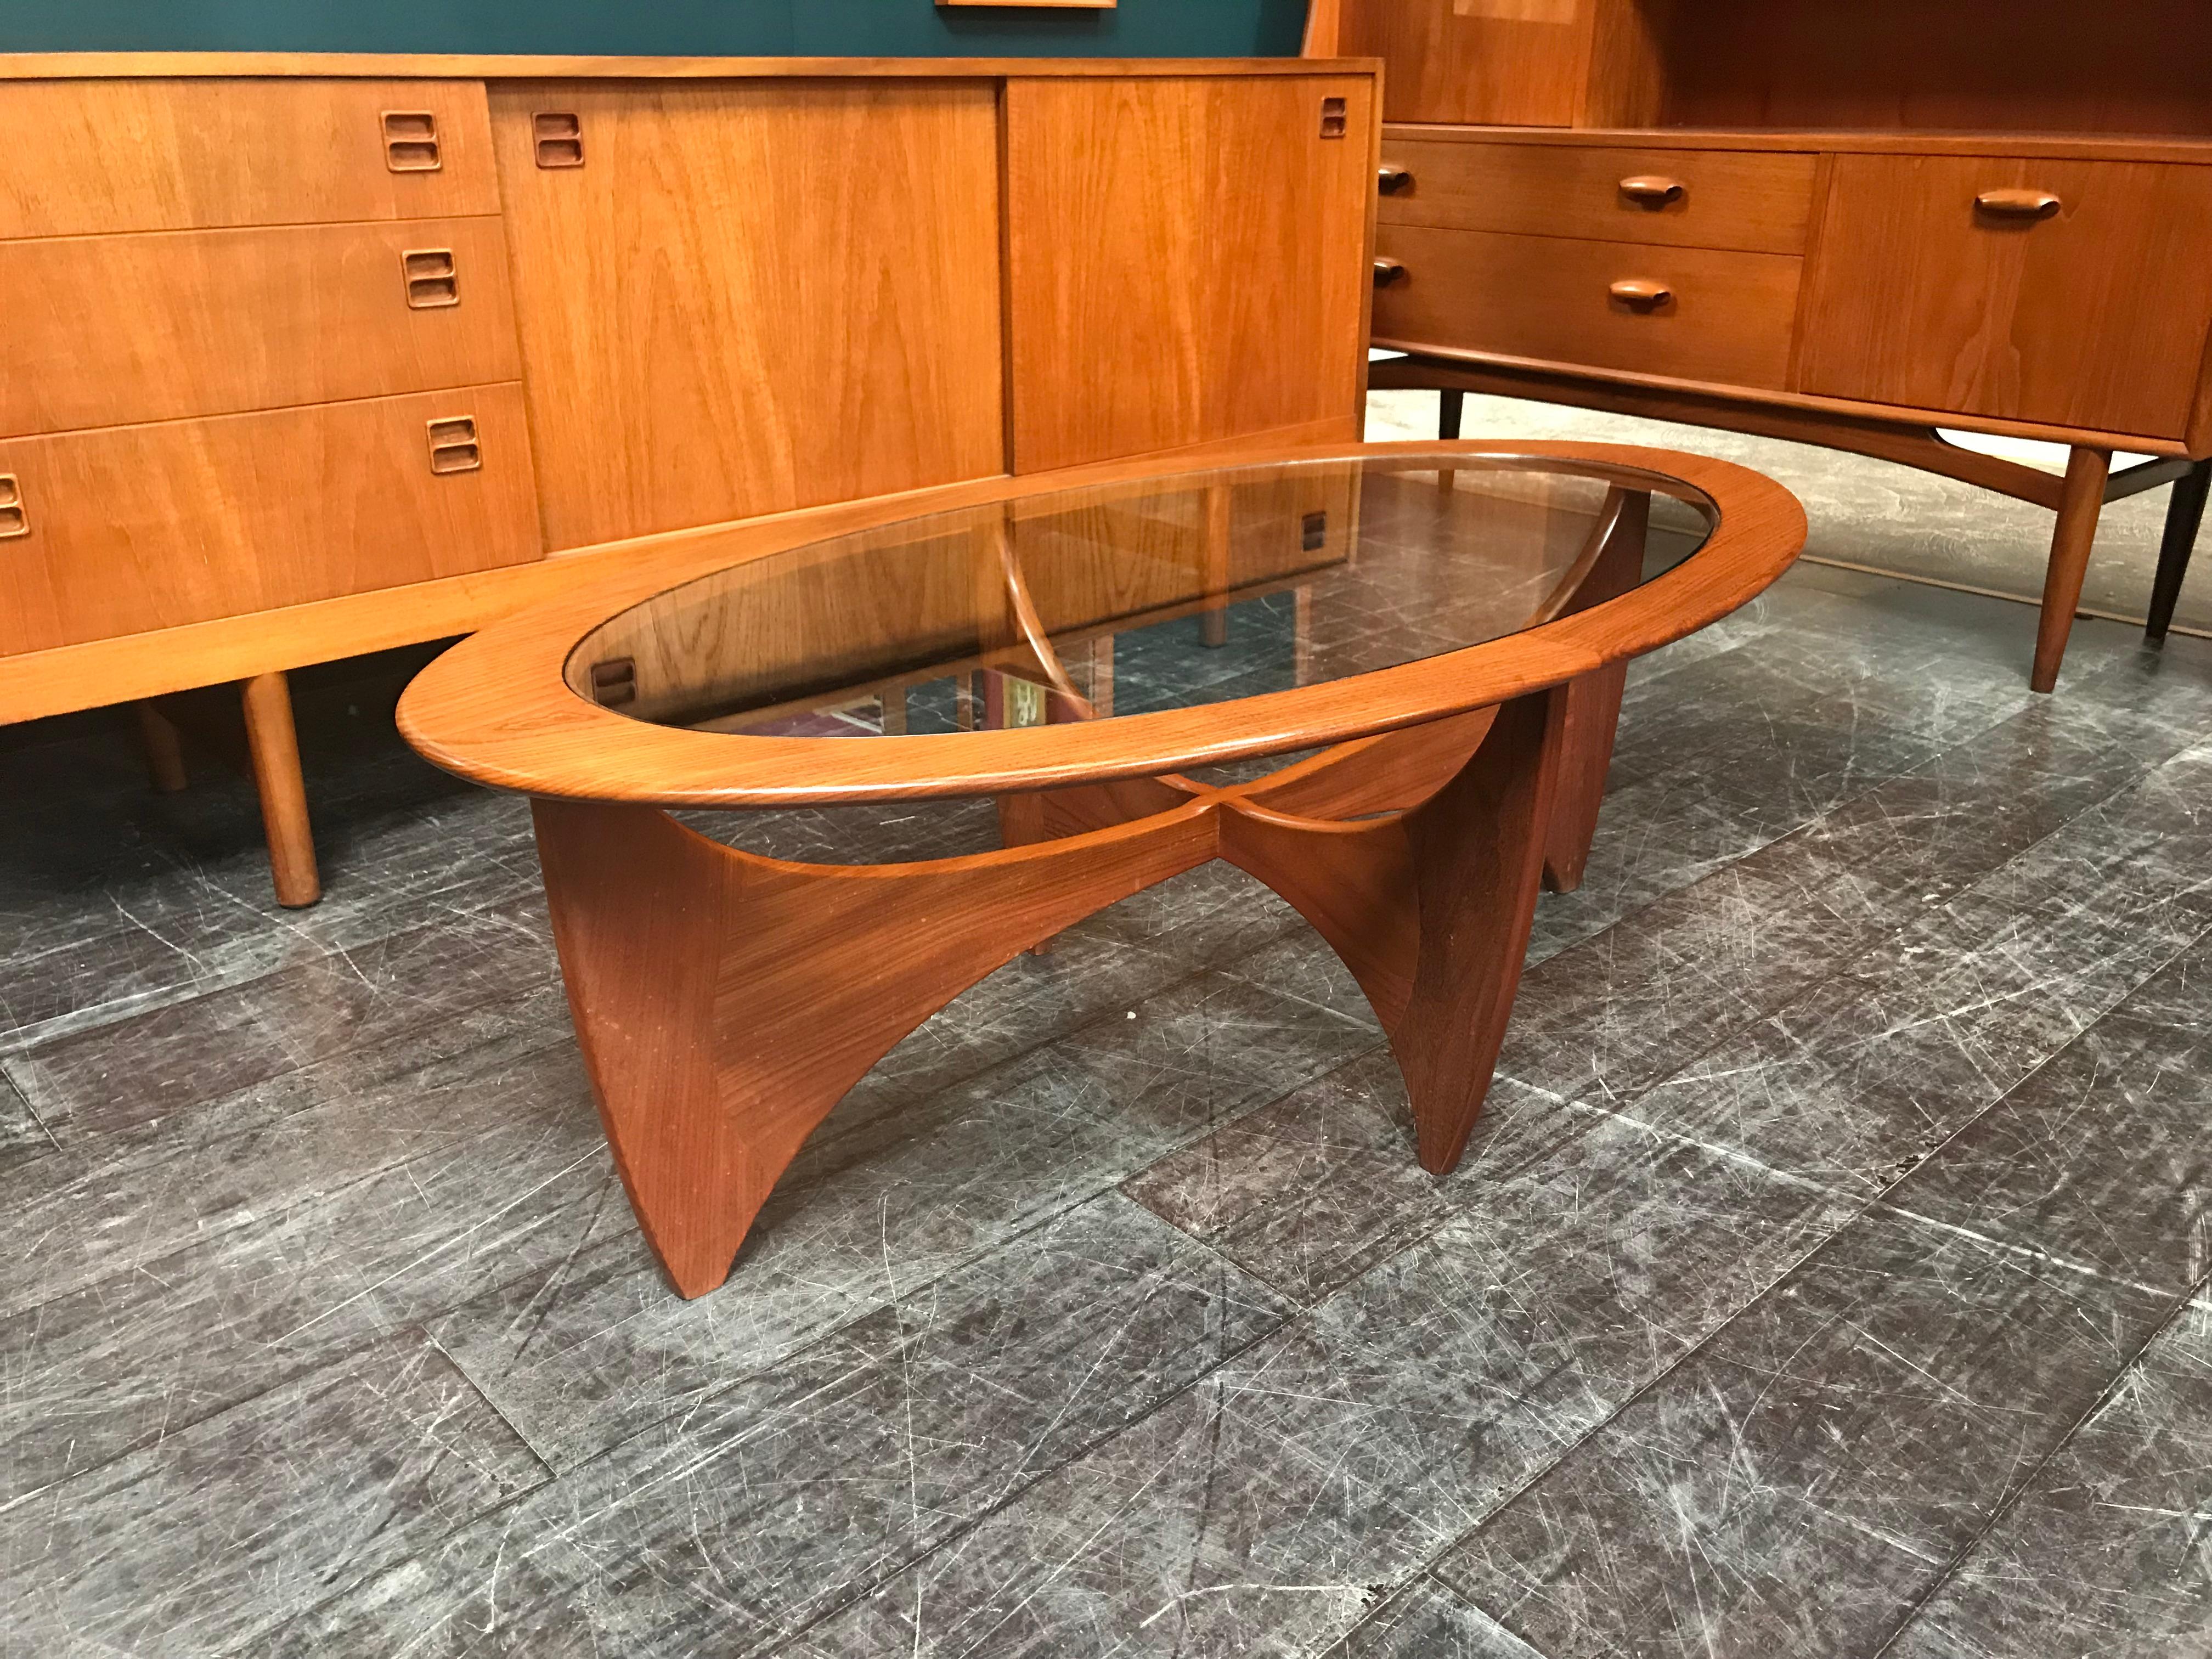 Mid-Century Modern Oval Astro Midcentury Teak and Glass Coffee Table by Vb Wilkins for G-Plan